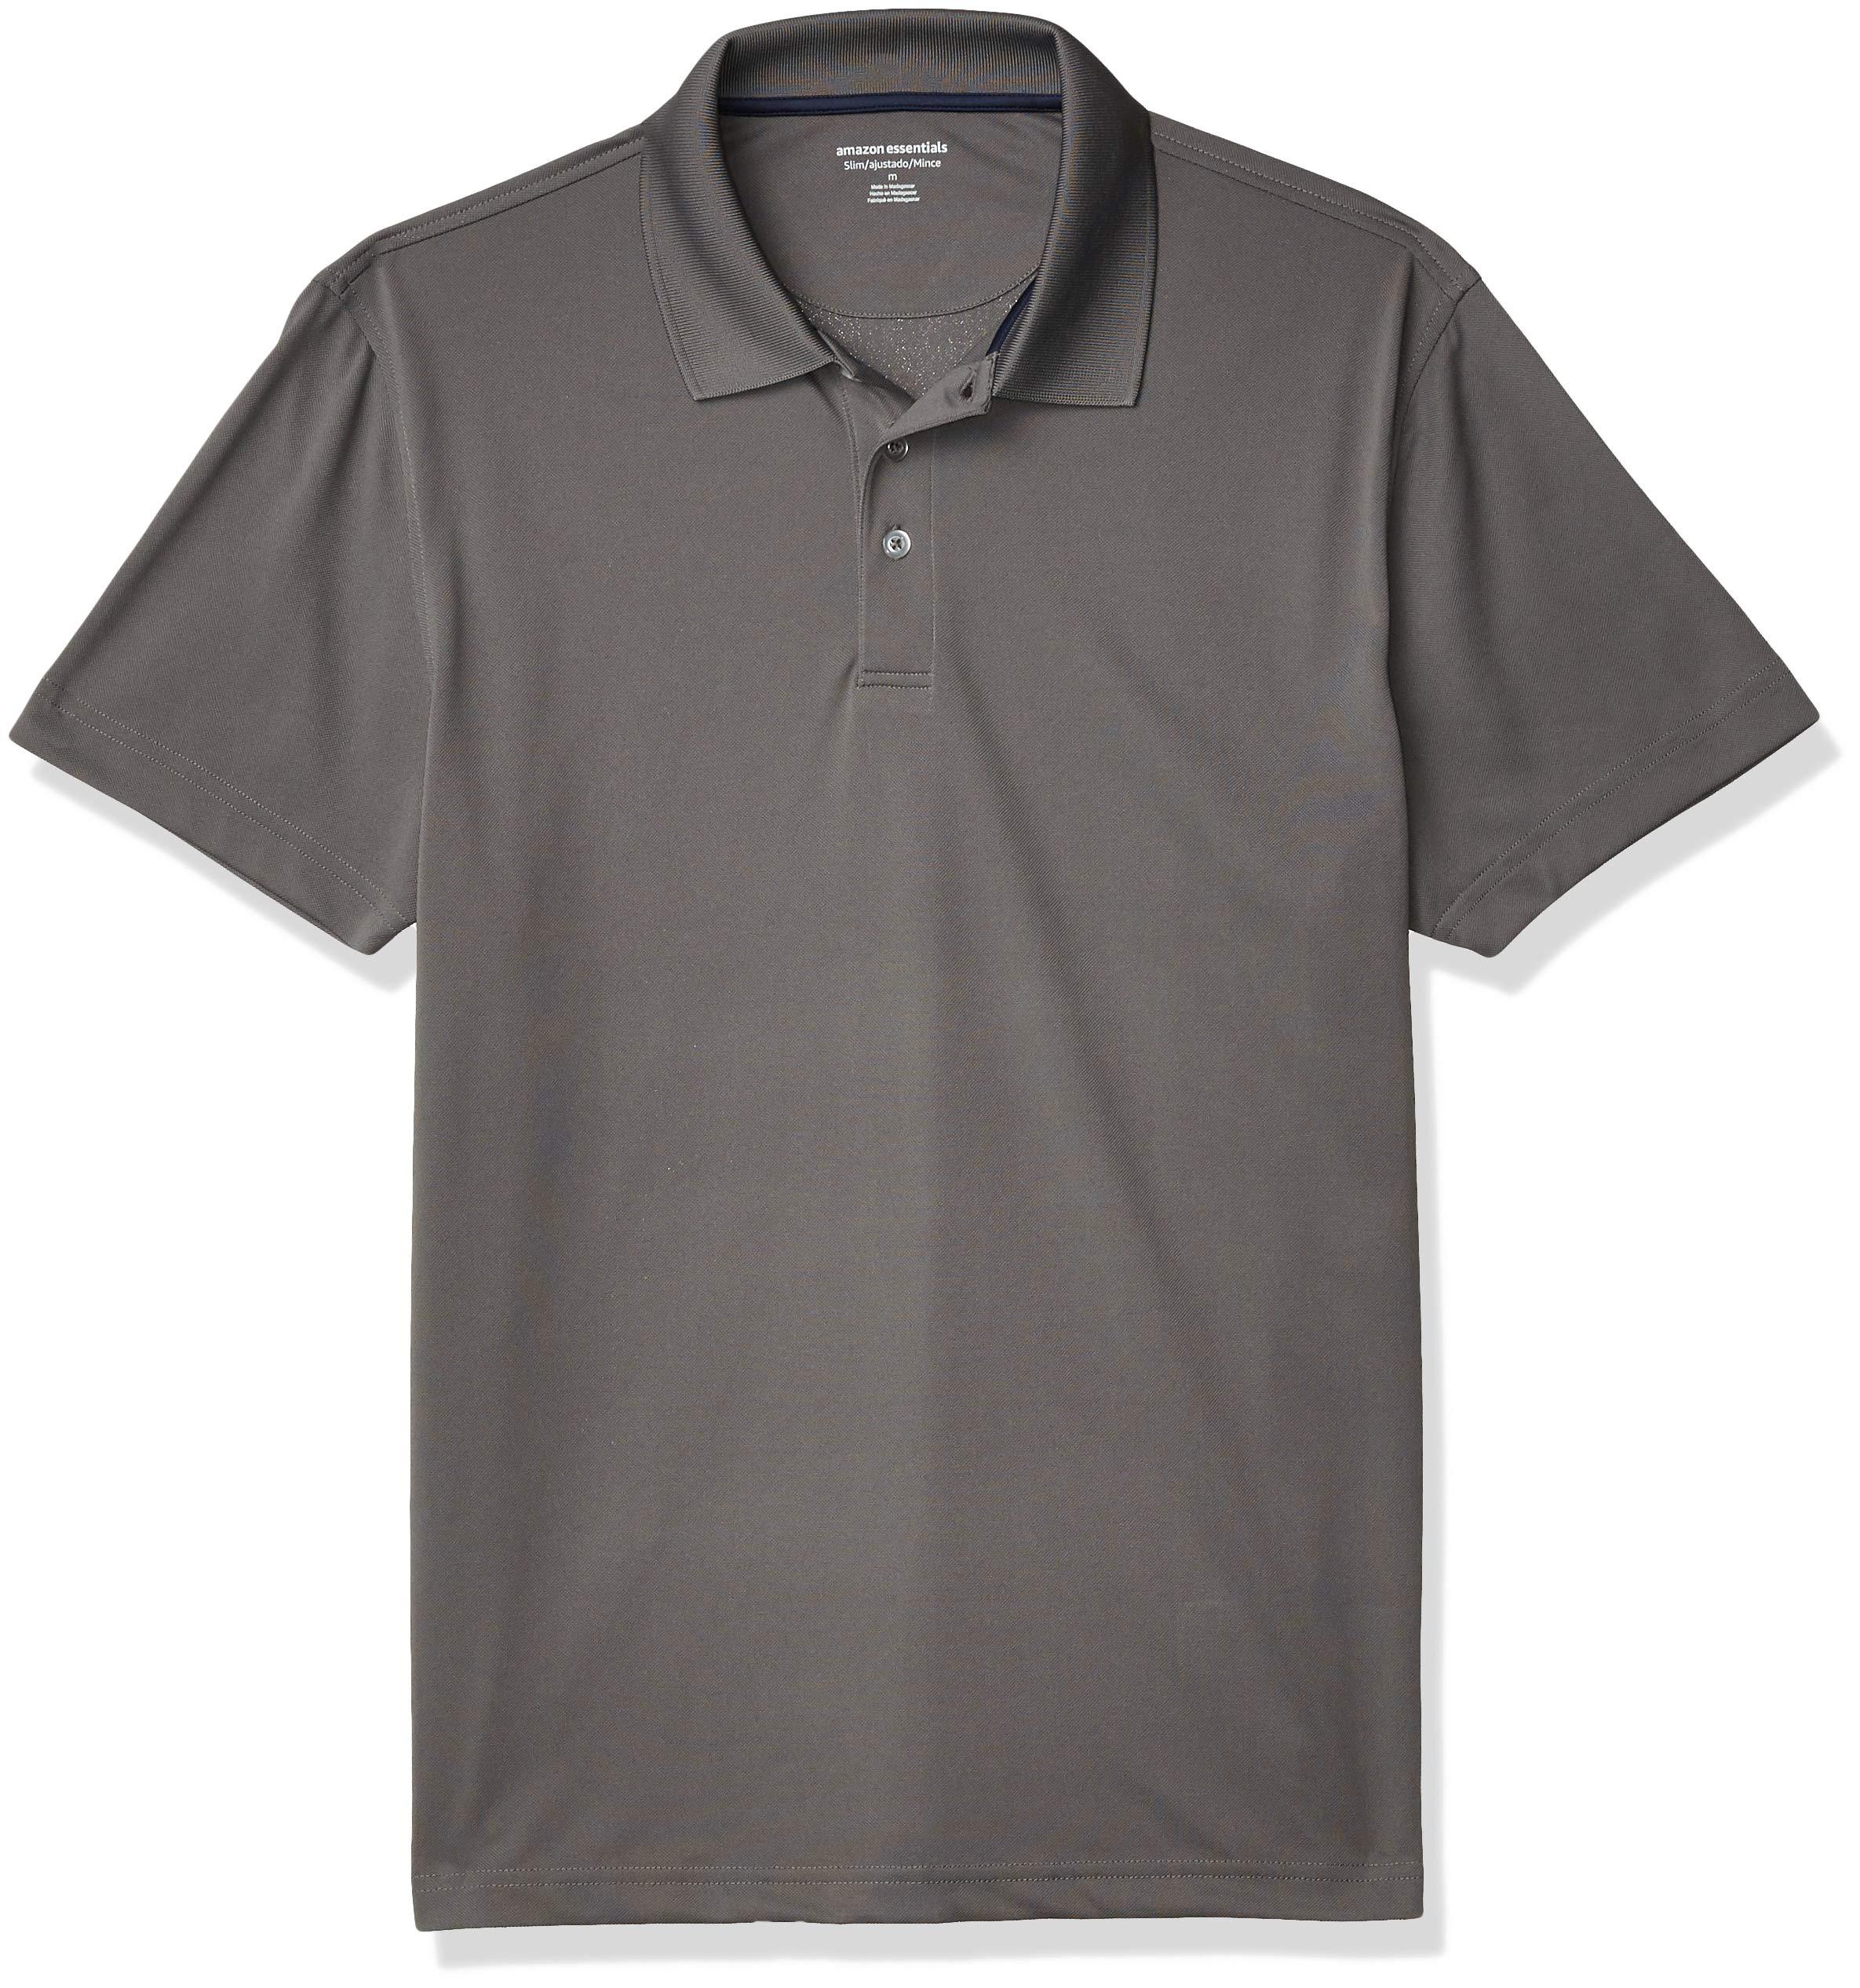 Amazon Essentials Slim-fit Quick-dry Golf Polo Shirt in Gray for Men - Lyst